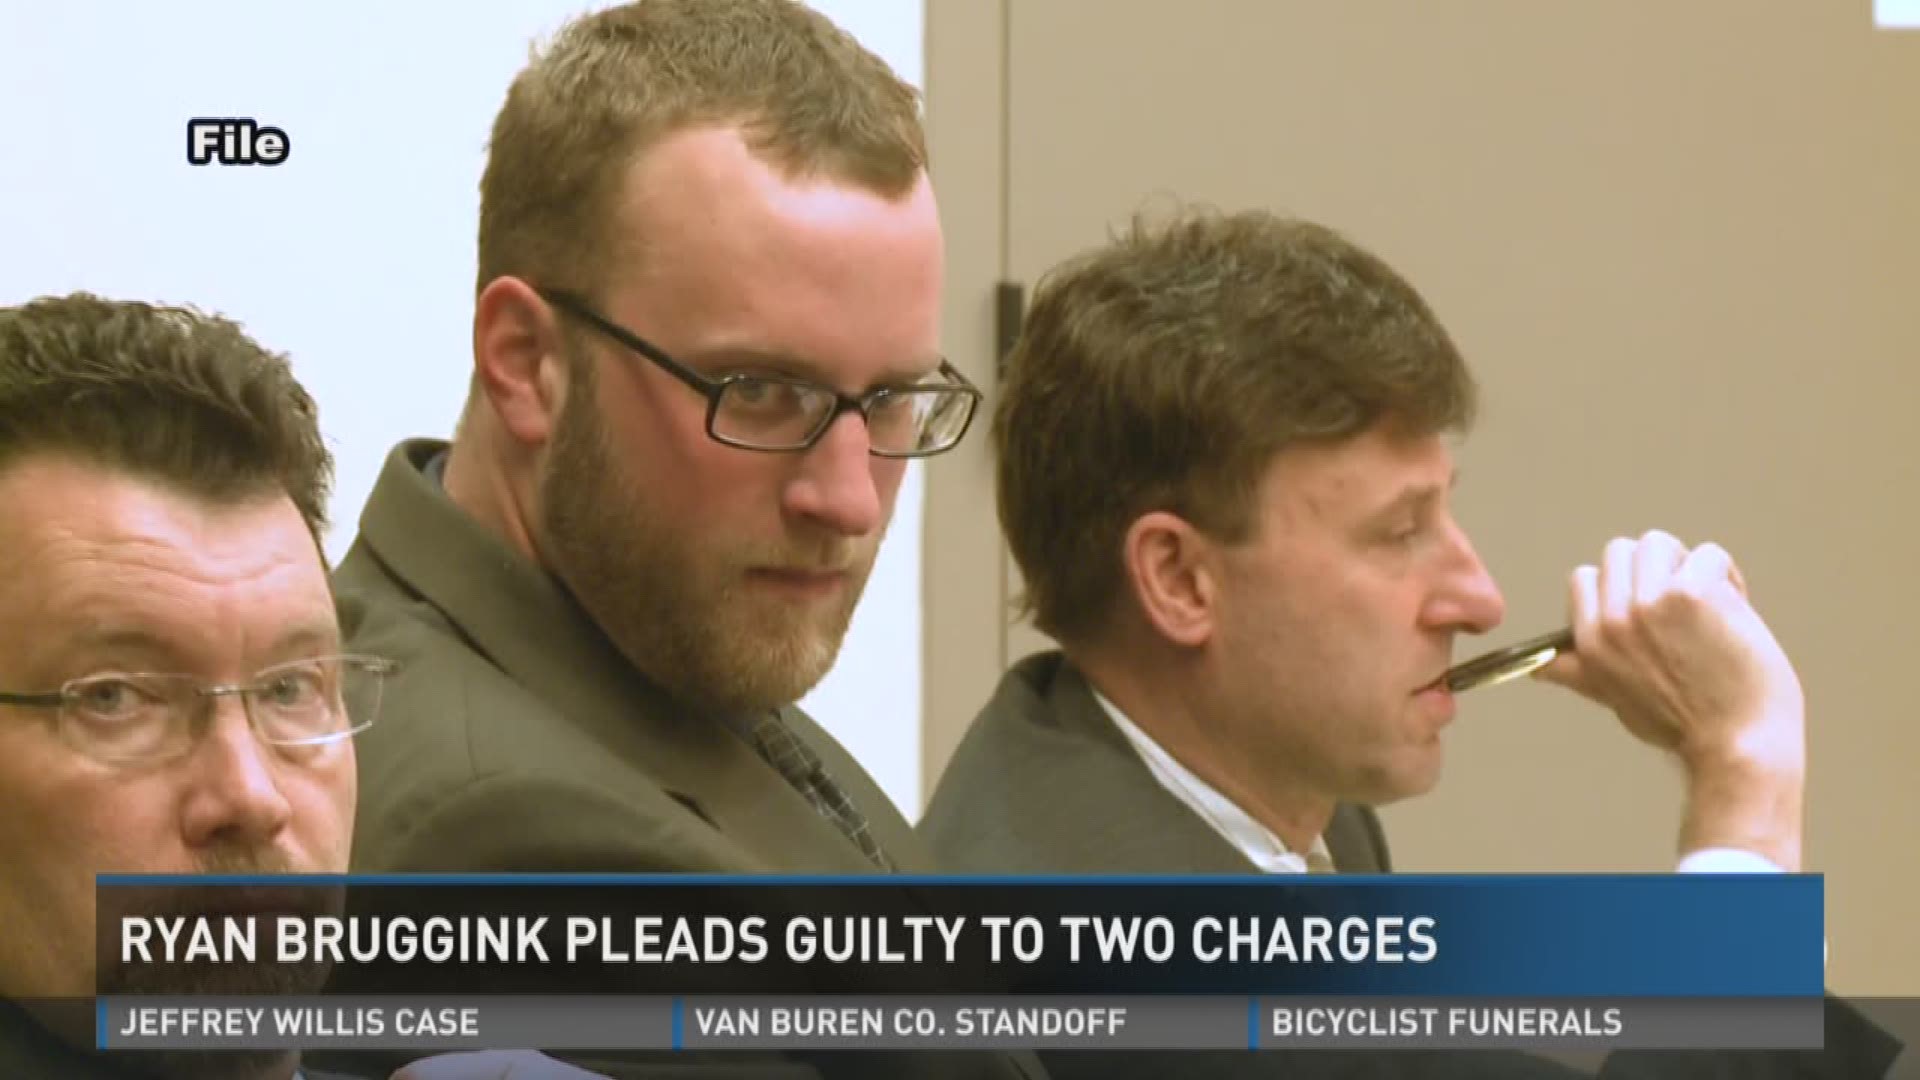 Ryan Bruggink pleaded guilty to charges for pornographic images sent to his phone by a 17-year-old girl.